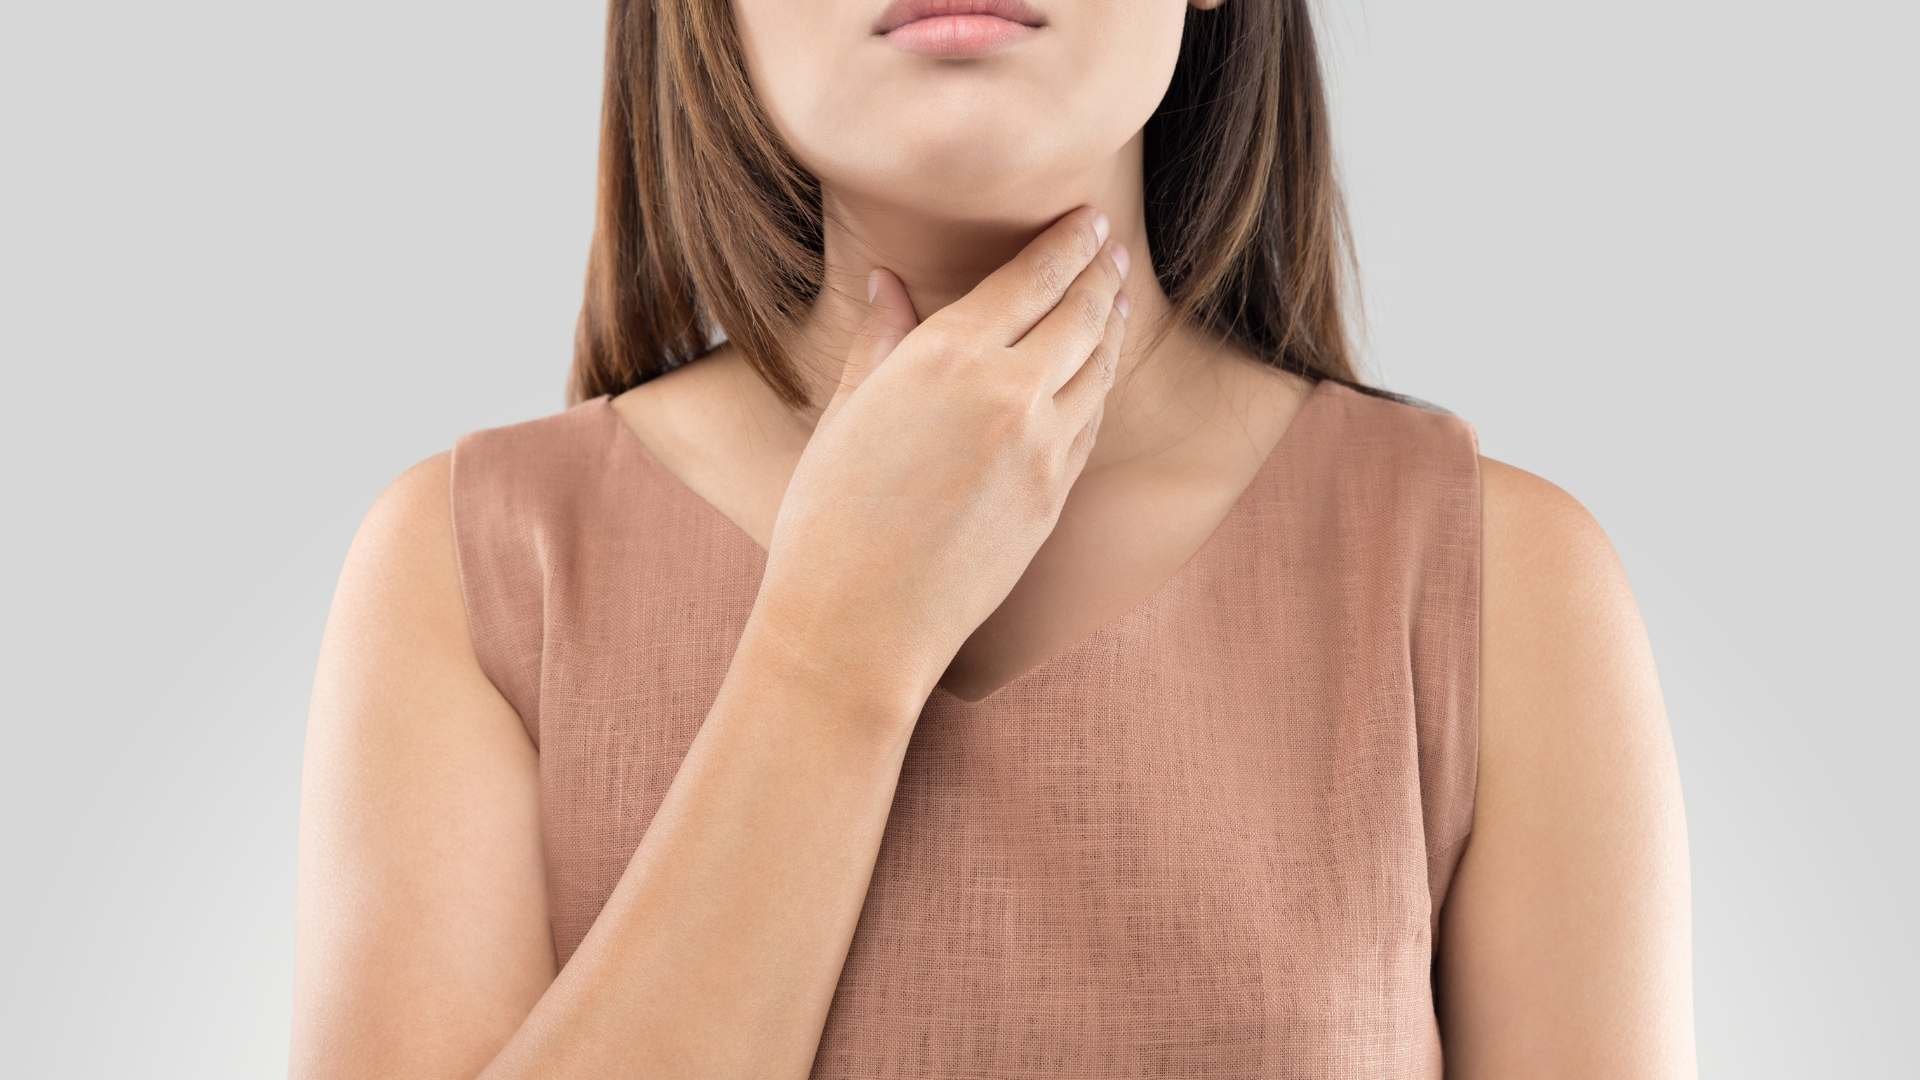 Thyroid Cancer: Knowing The Facts This Thyroid Cancer Awareness Month